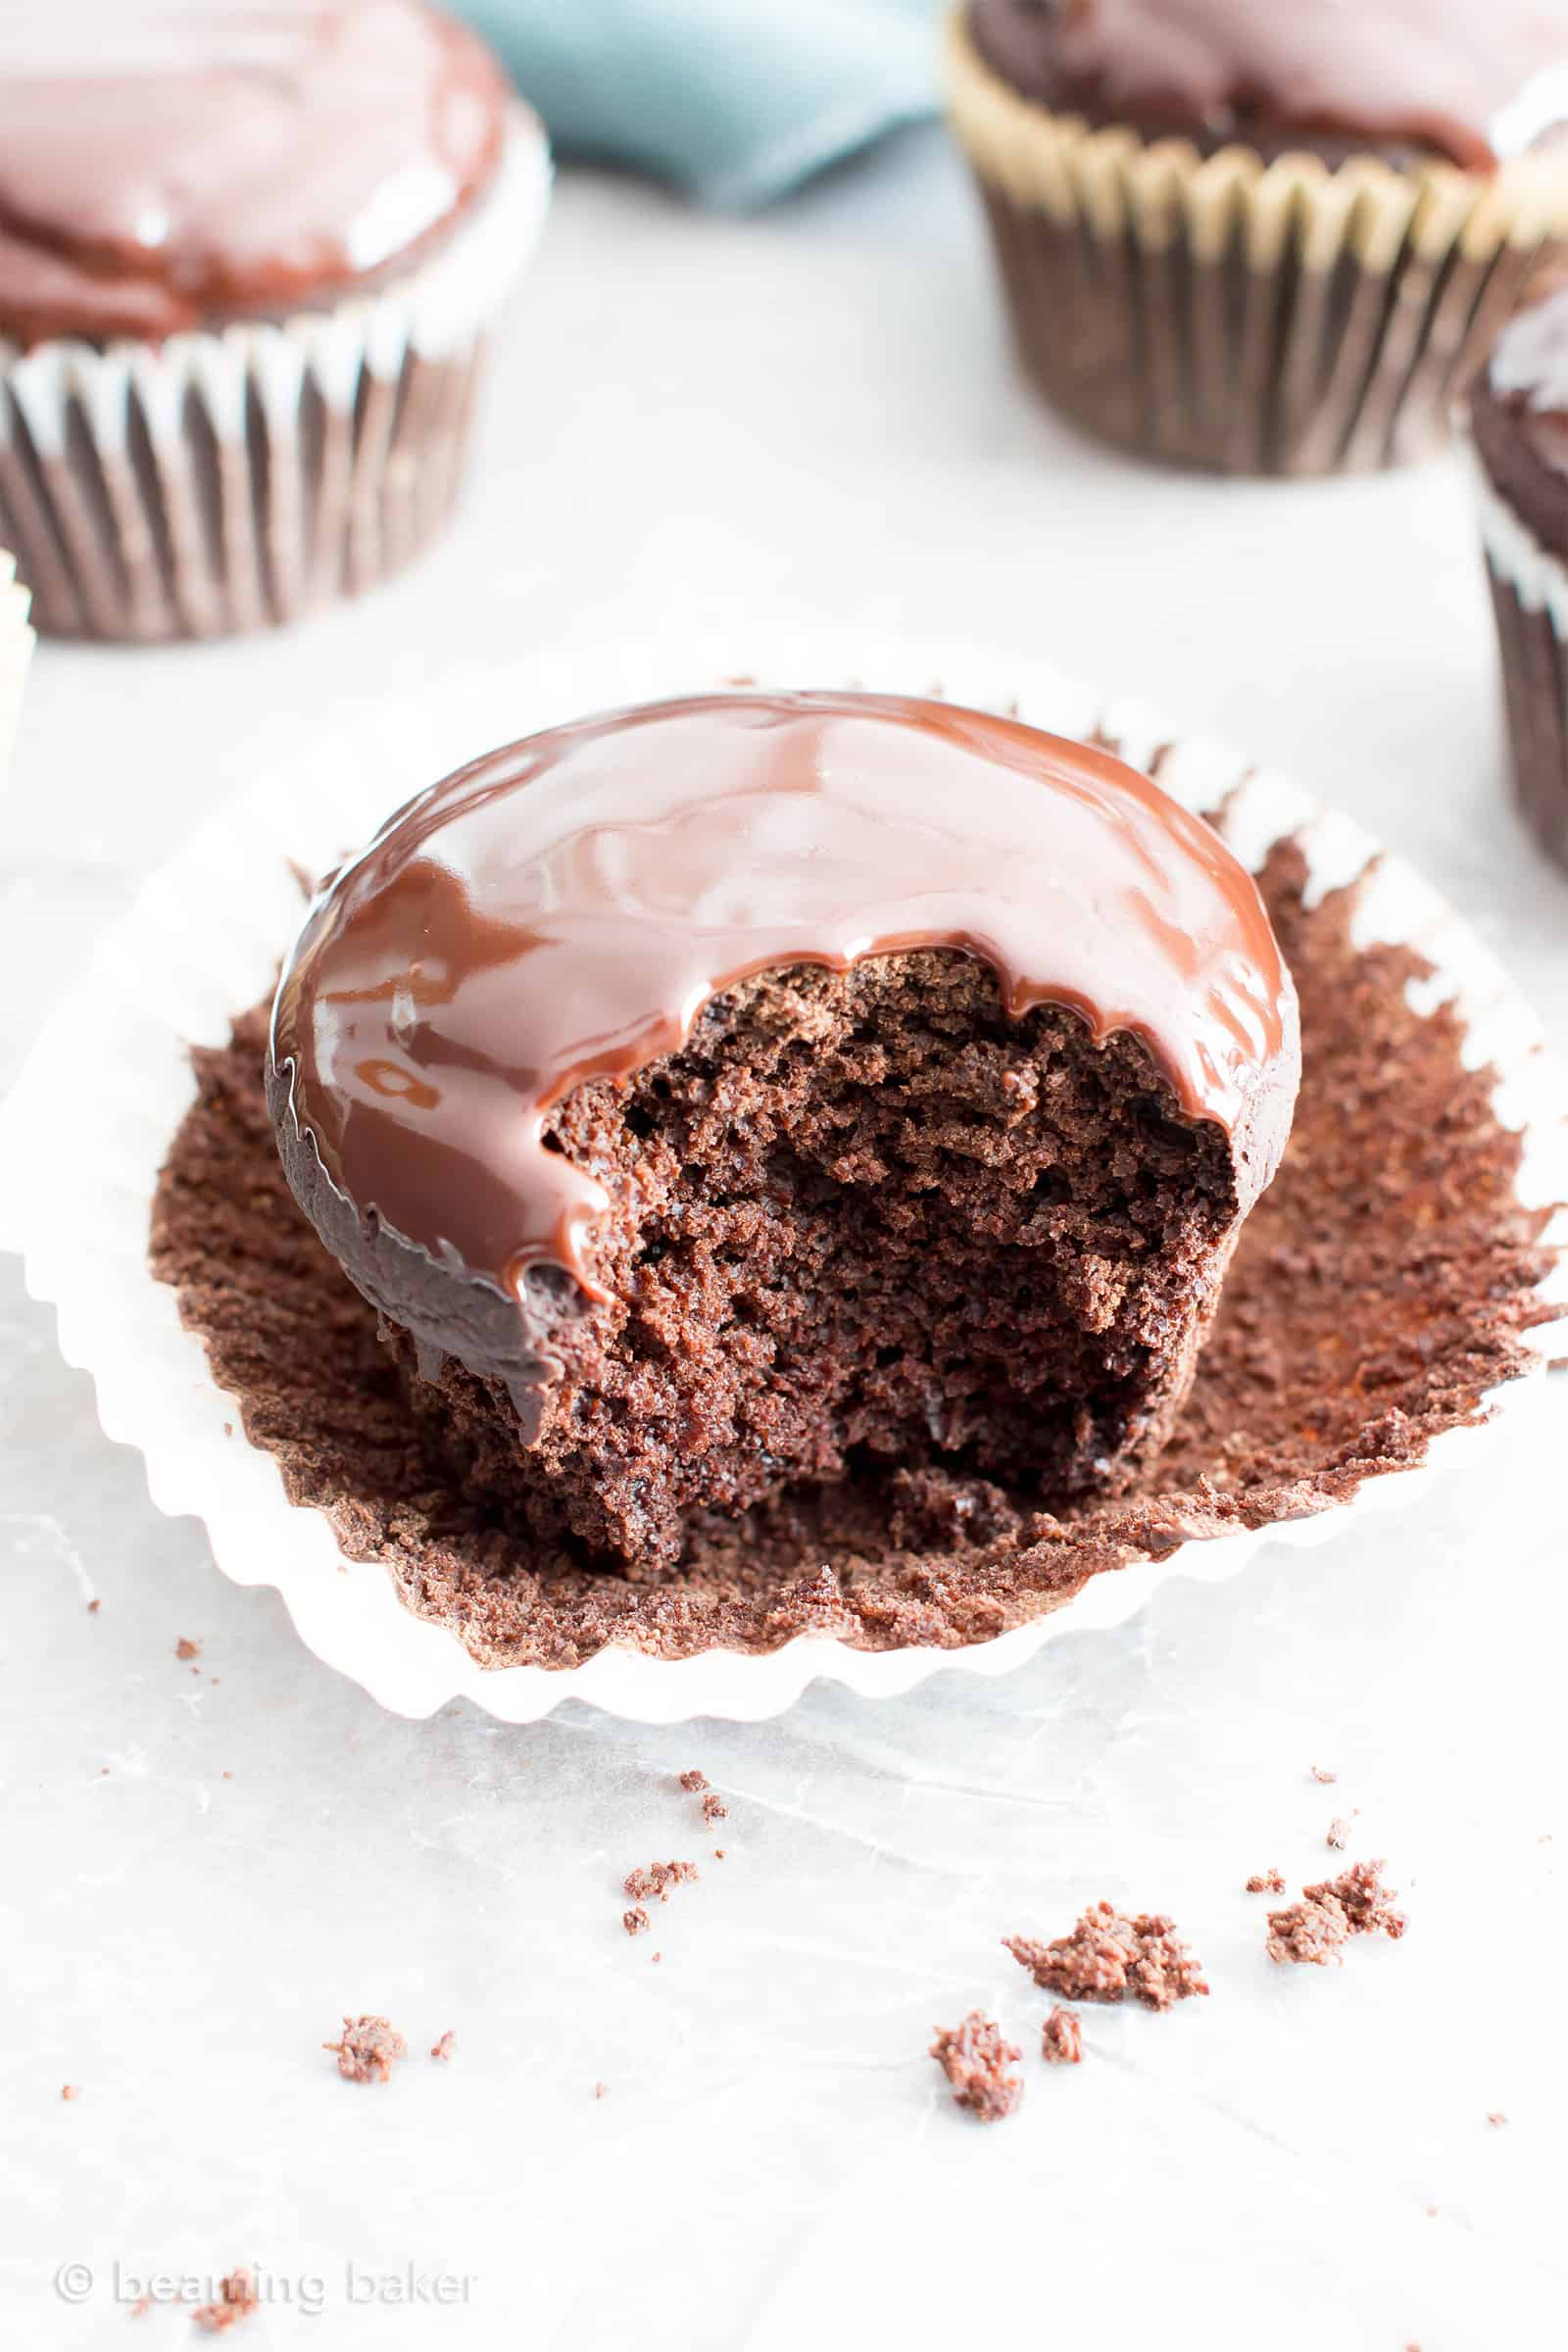 Chocolate Ganache Cupcakes (V, GF): an easy recipe for perfectly moist chocolate cupcakes covered in a thick layer of rich chocolate ganache! #Vegan #GlutenFree #DairyFree #Chocolate #Dessert | Recipe on BeamingBaker.com